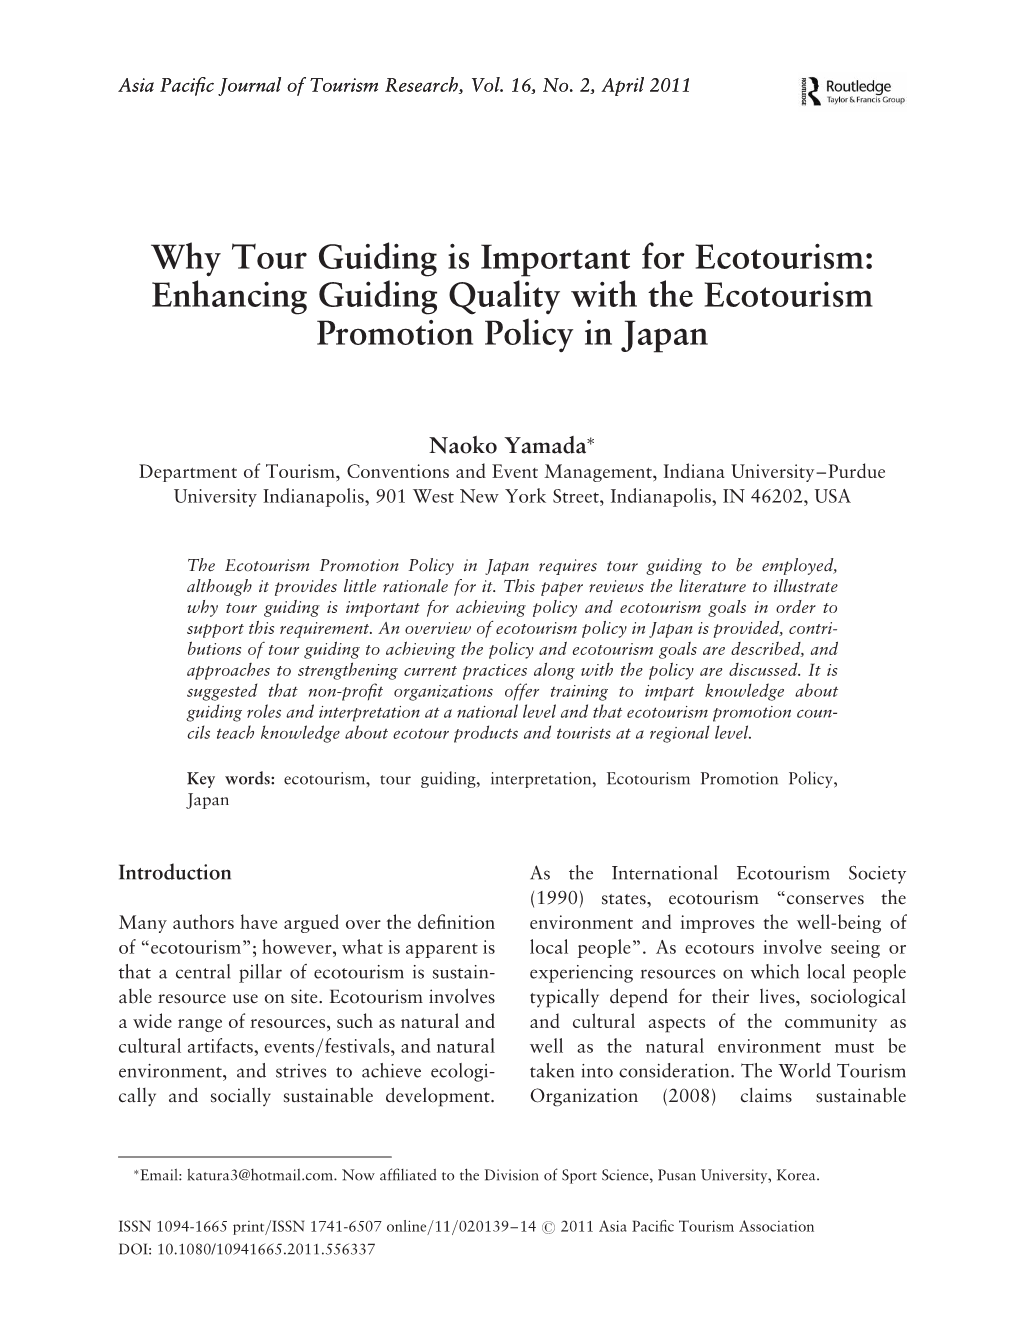 Why Tour Guiding Is Important for Ecotourism: Enhancing Guiding Quality with the Ecotourism Promotion Policy in Japan